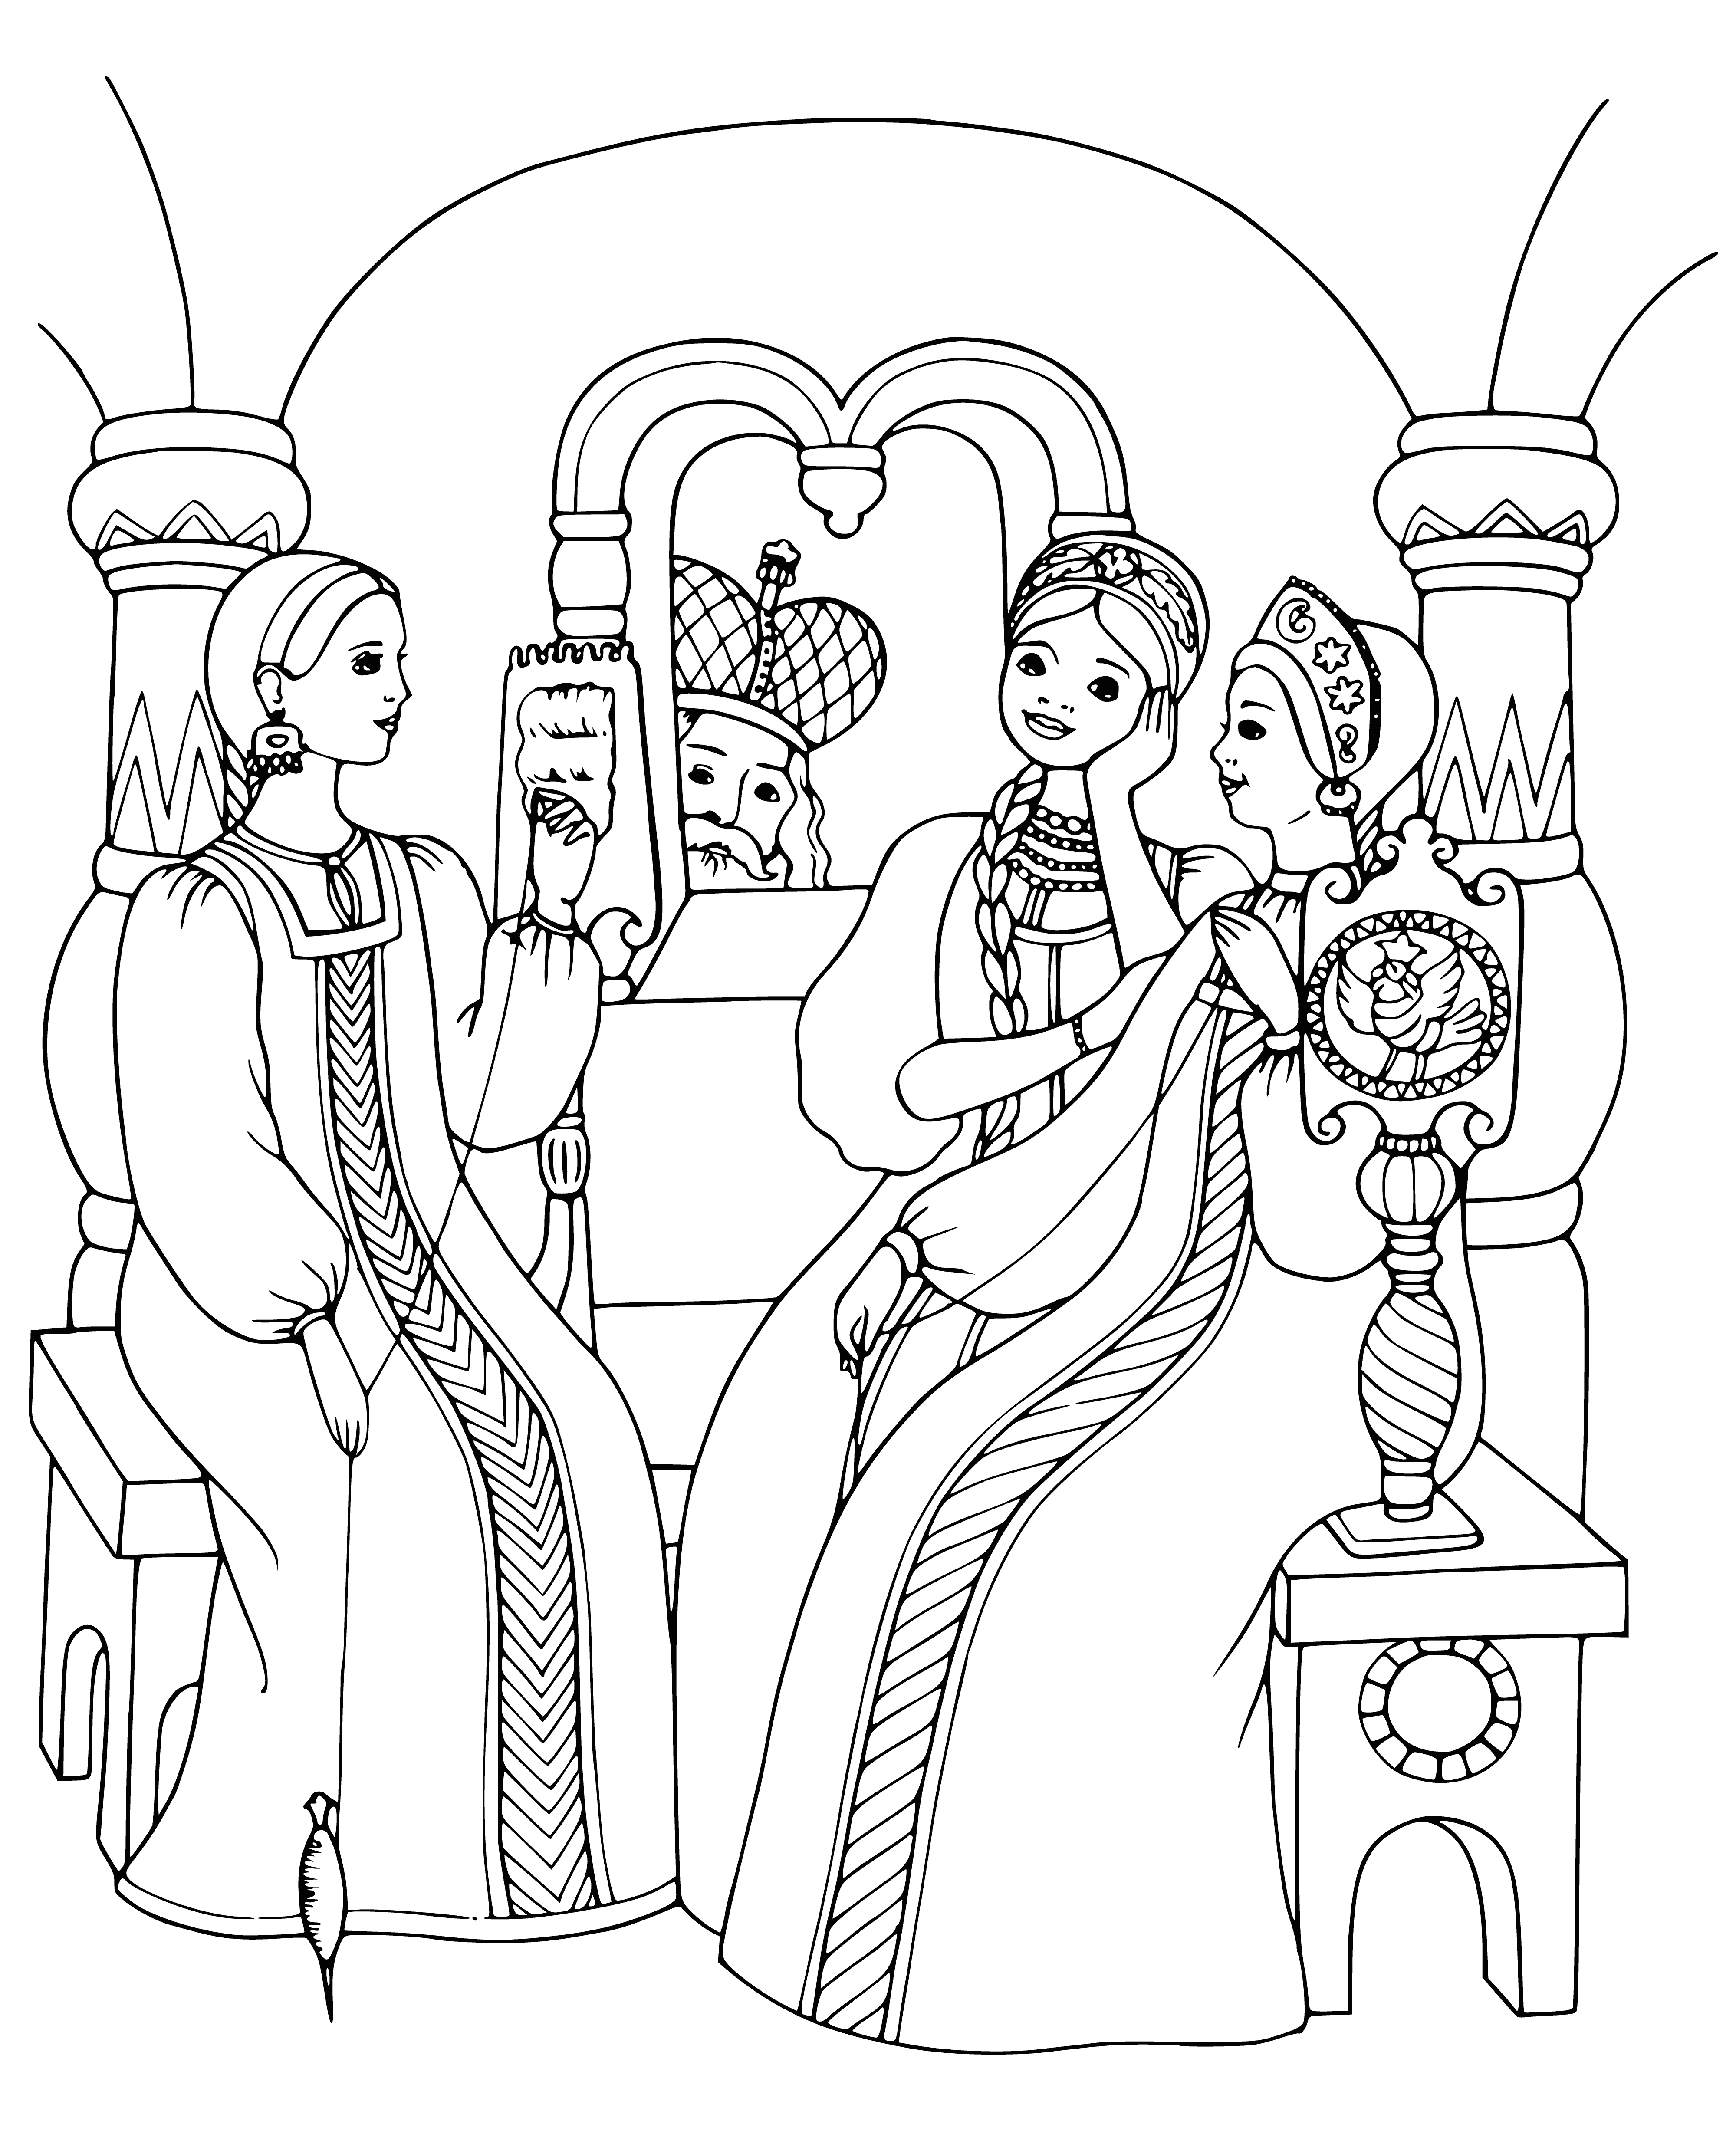 coloring page: 3 maidens in white elegant dresses looking out window, 1 w/ gentle expression, gazing into her lap.